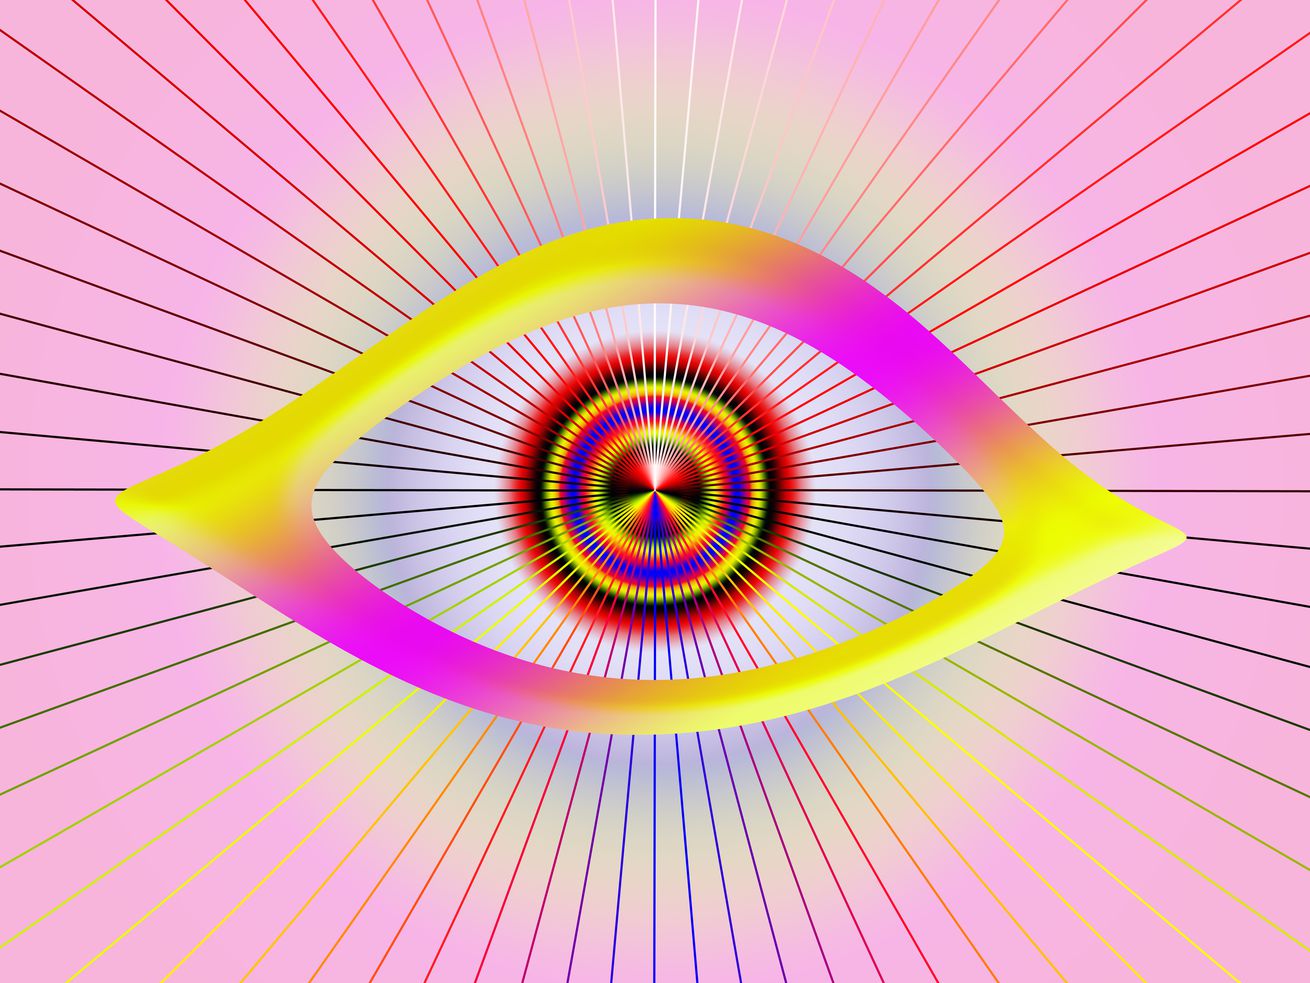 A multicolored illustration of an eye with a patterned pupil and rays emitting from it. 